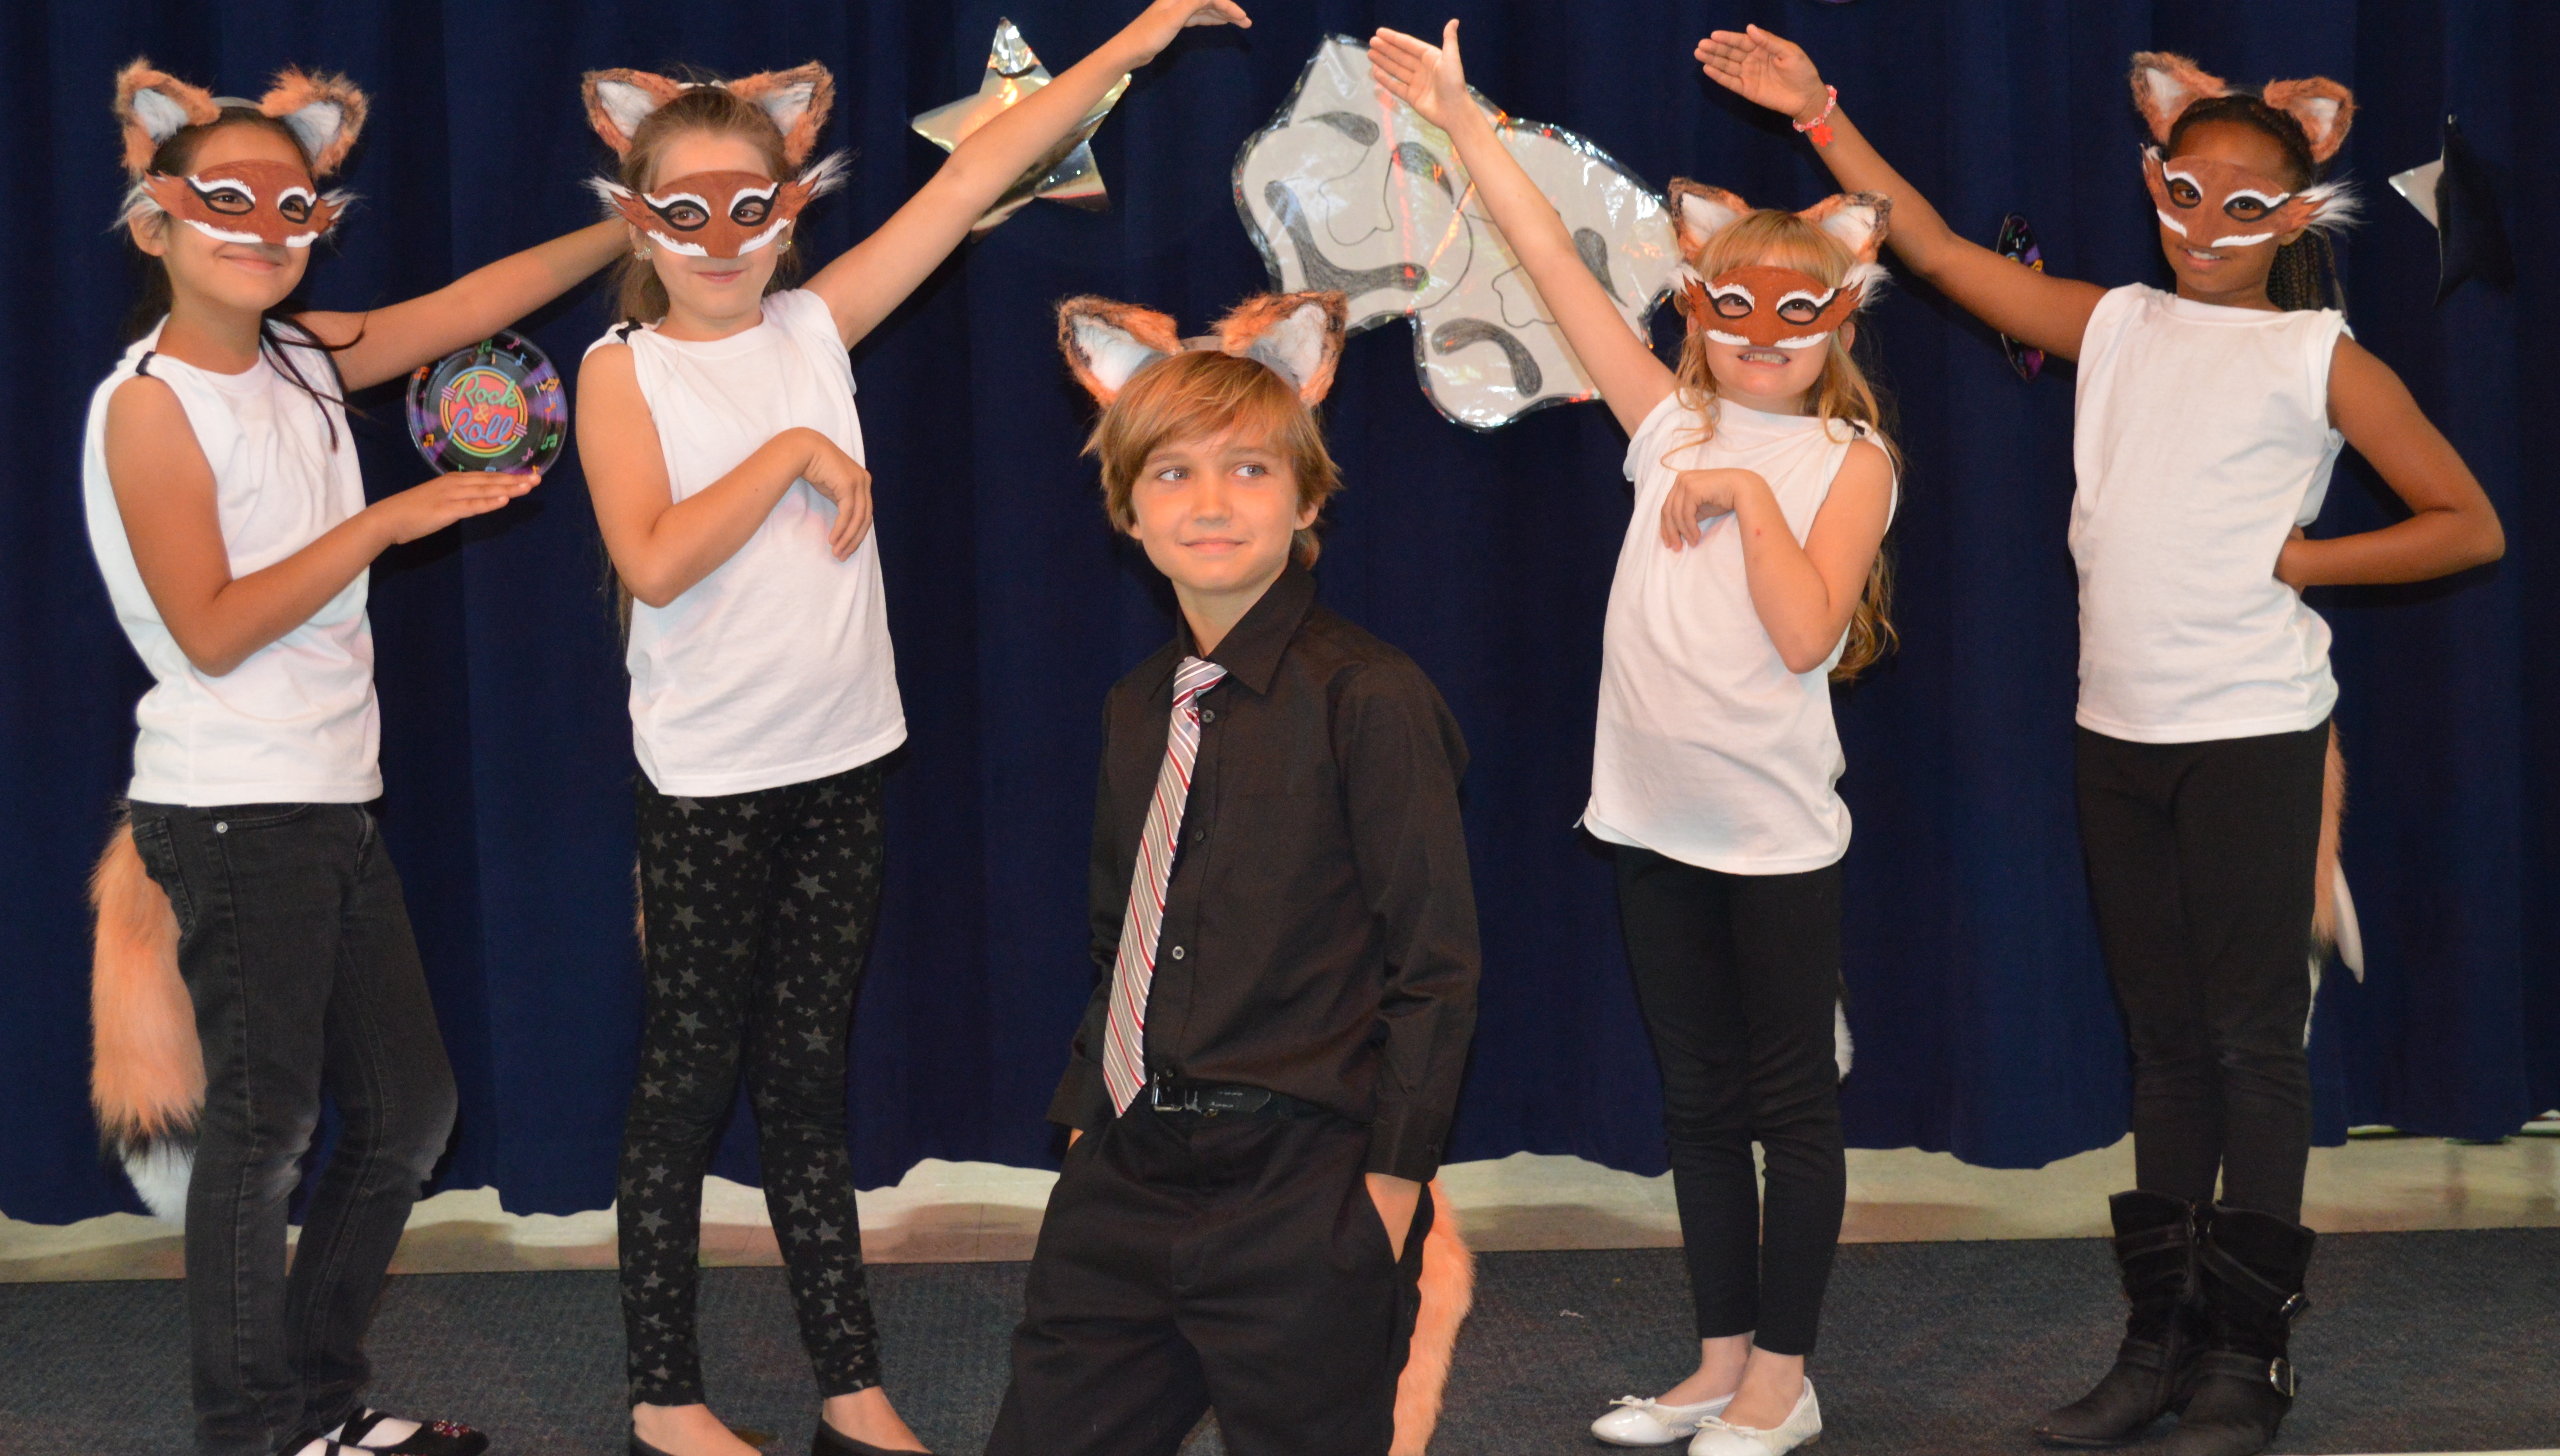 Ryan Veronick with back up dancers.Doing his first comedy act and singing What Does The Fox Say at his 3rd grade talent show. June 6 2014